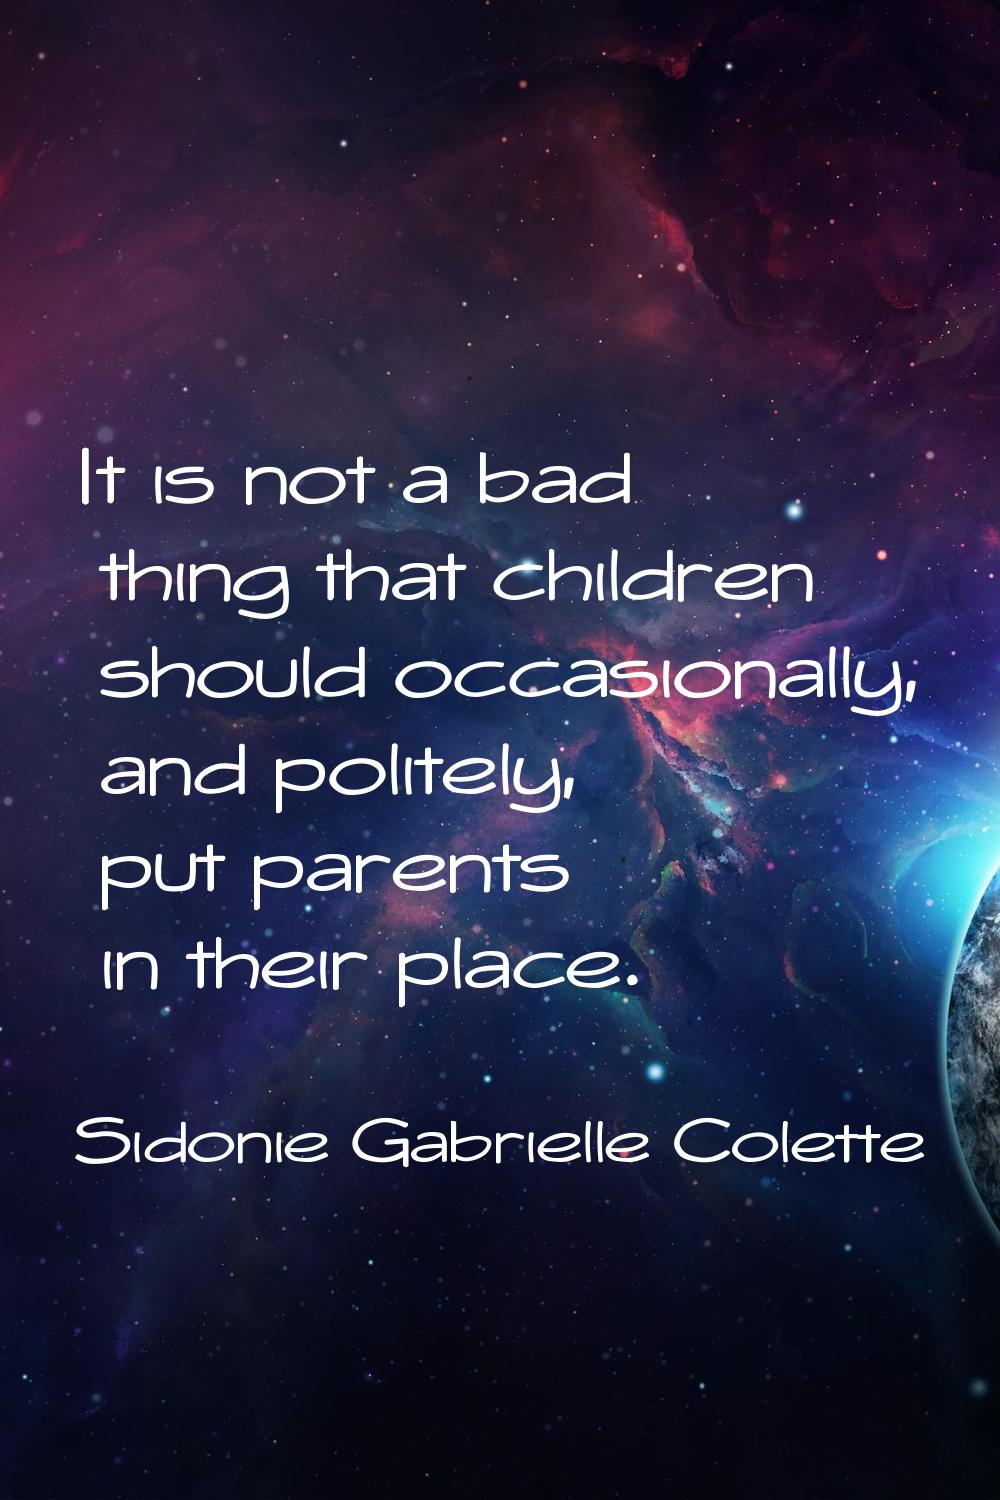 It is not a bad thing that children should occasionally, and politely, put parents in their place.